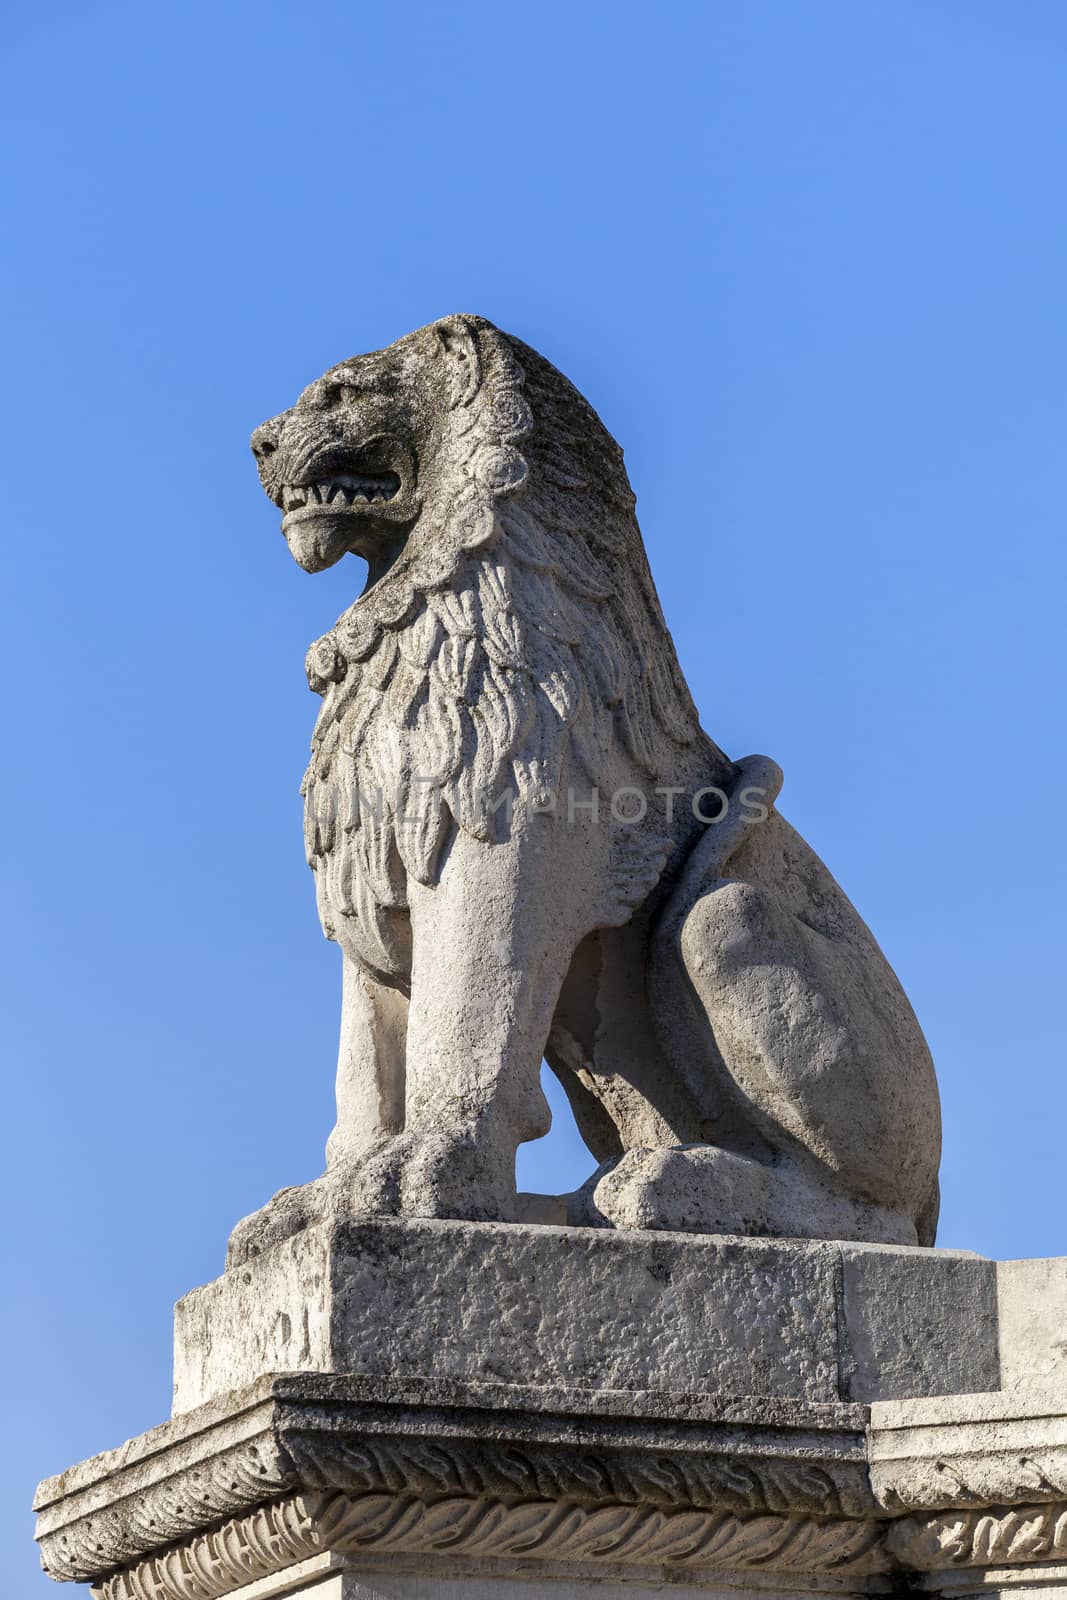 Stone lion statue in Budapest, Hungary, view from below